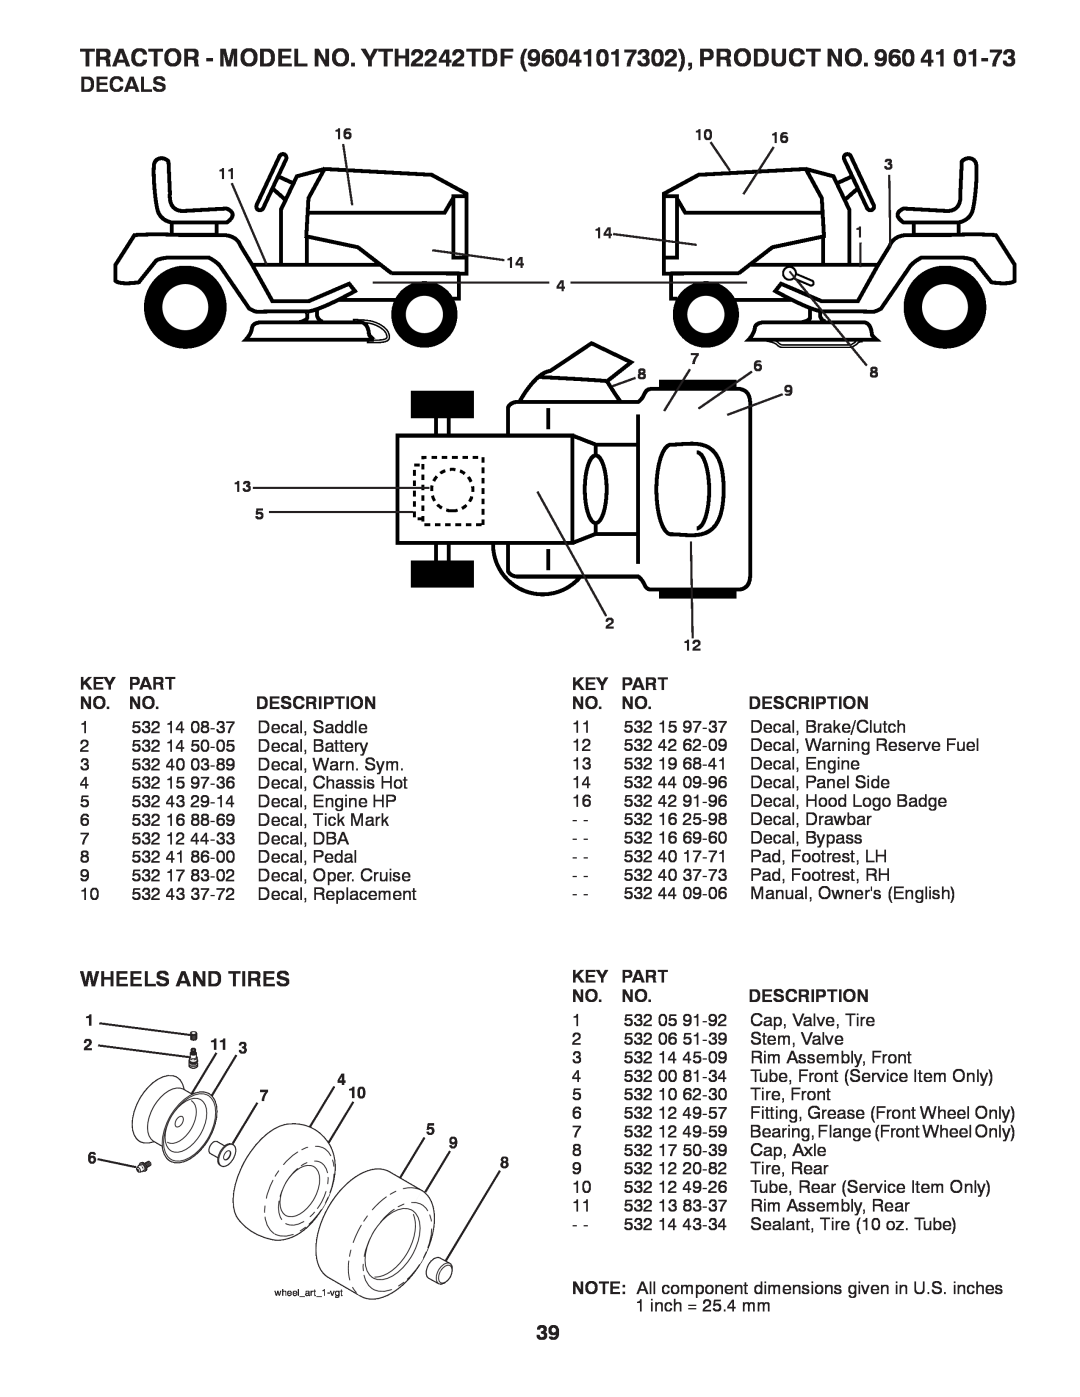 Husqvarna YTH2242TDF owner manual Decals, Wheels And Tires 